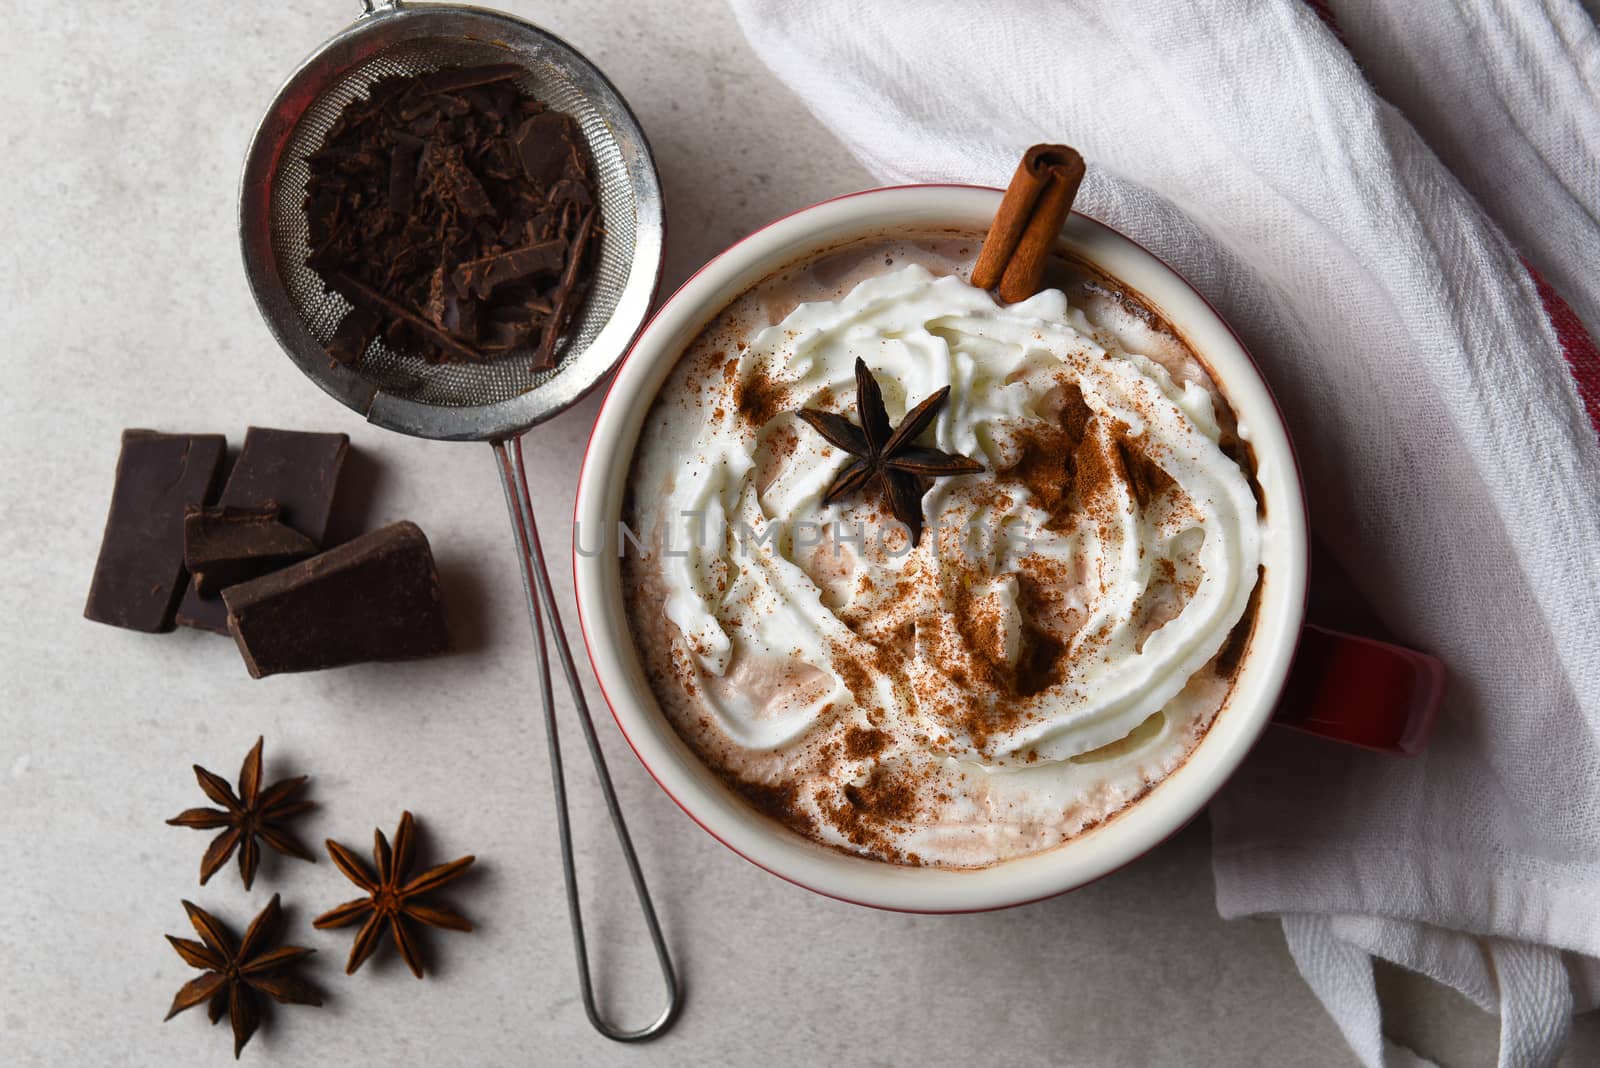 Top view of a large mug of hot cocoa topped with whipped cream and cinnamon and star anise.